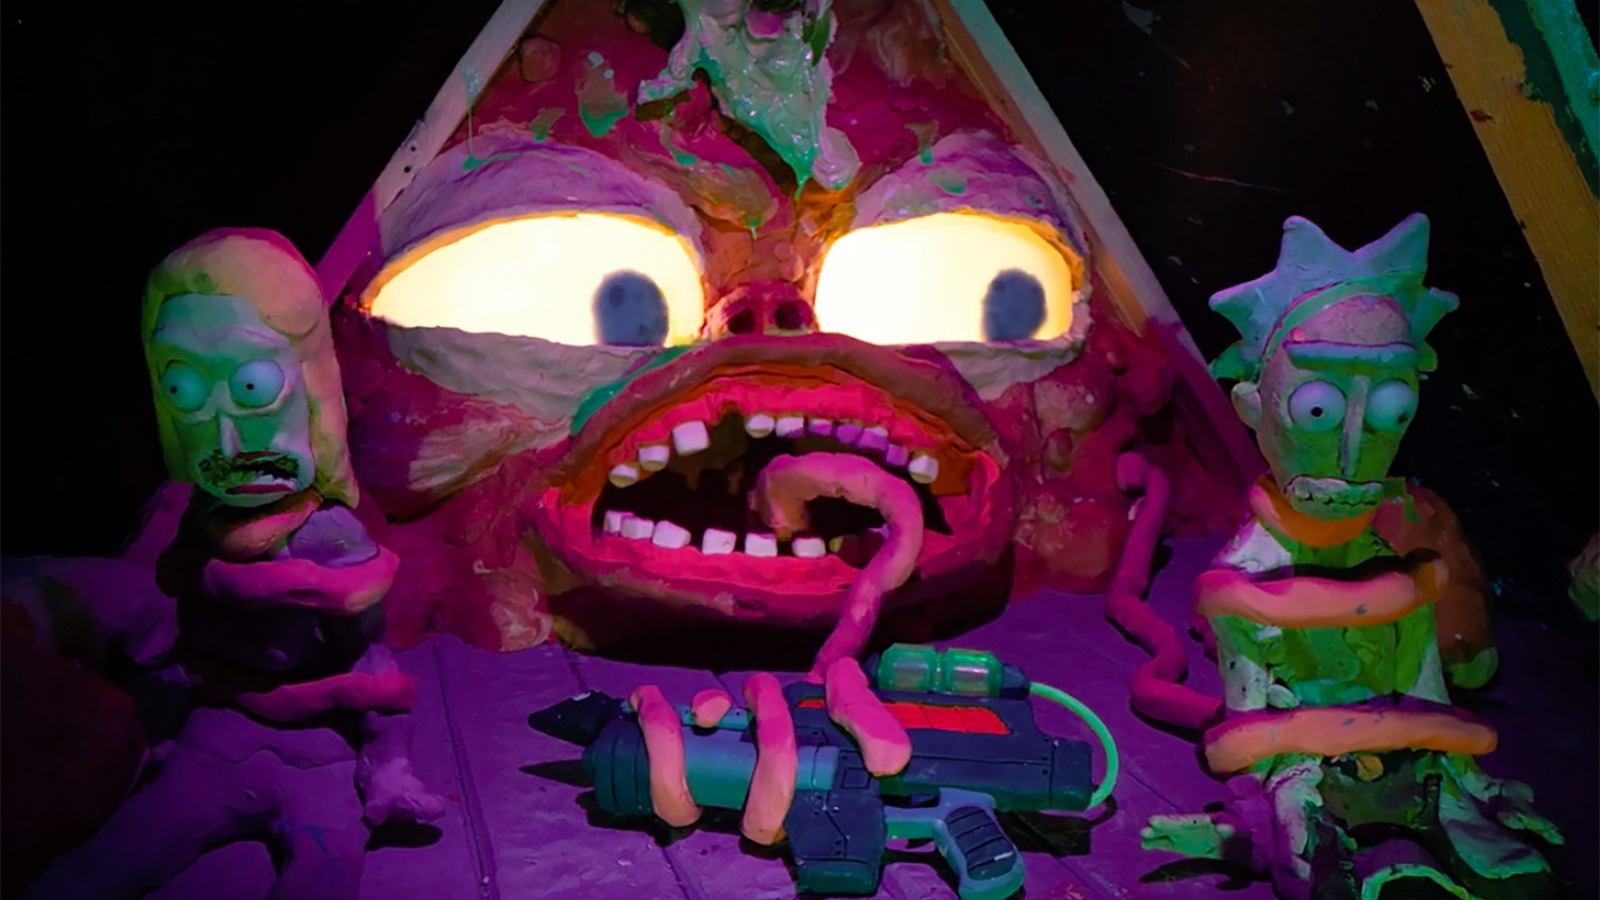 Animator Lee Hardcastle On Producing His Surreal Rick And Morty Halloween  Special [Exclusive Interview]